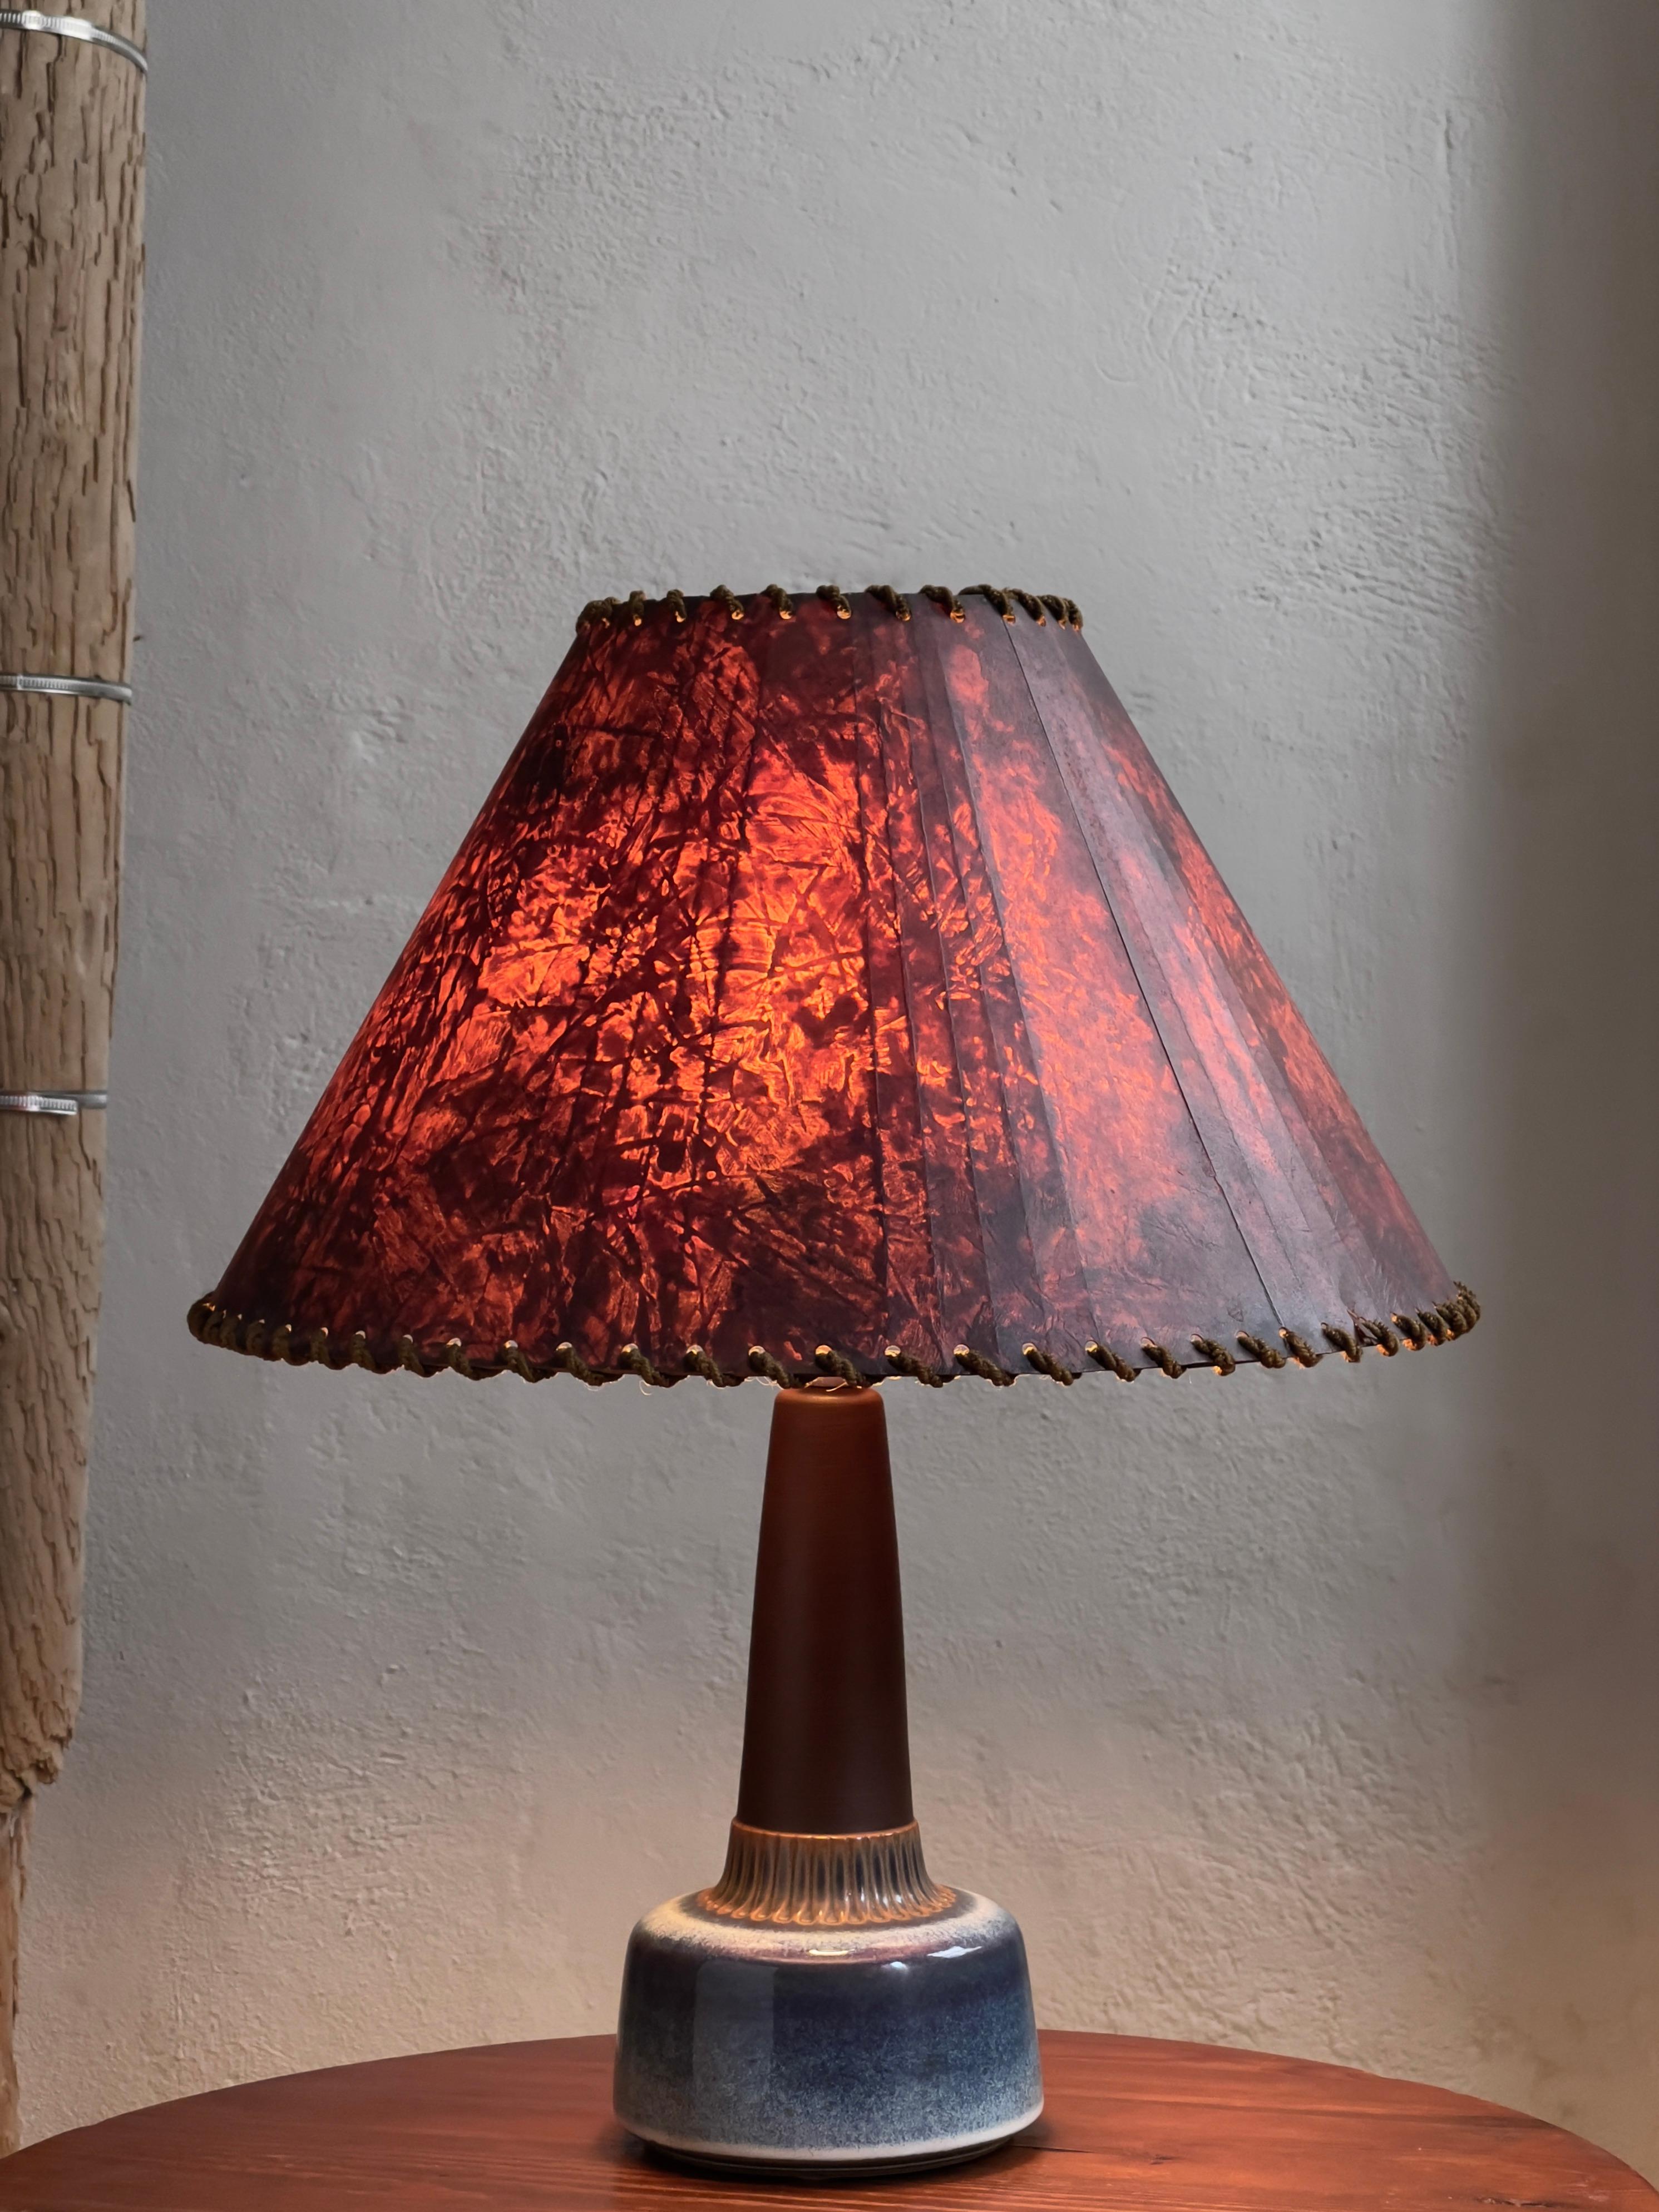 1960s Ceramic Table Lamp by Søholm with Vintage Decorated Paper Shade For Sale 1